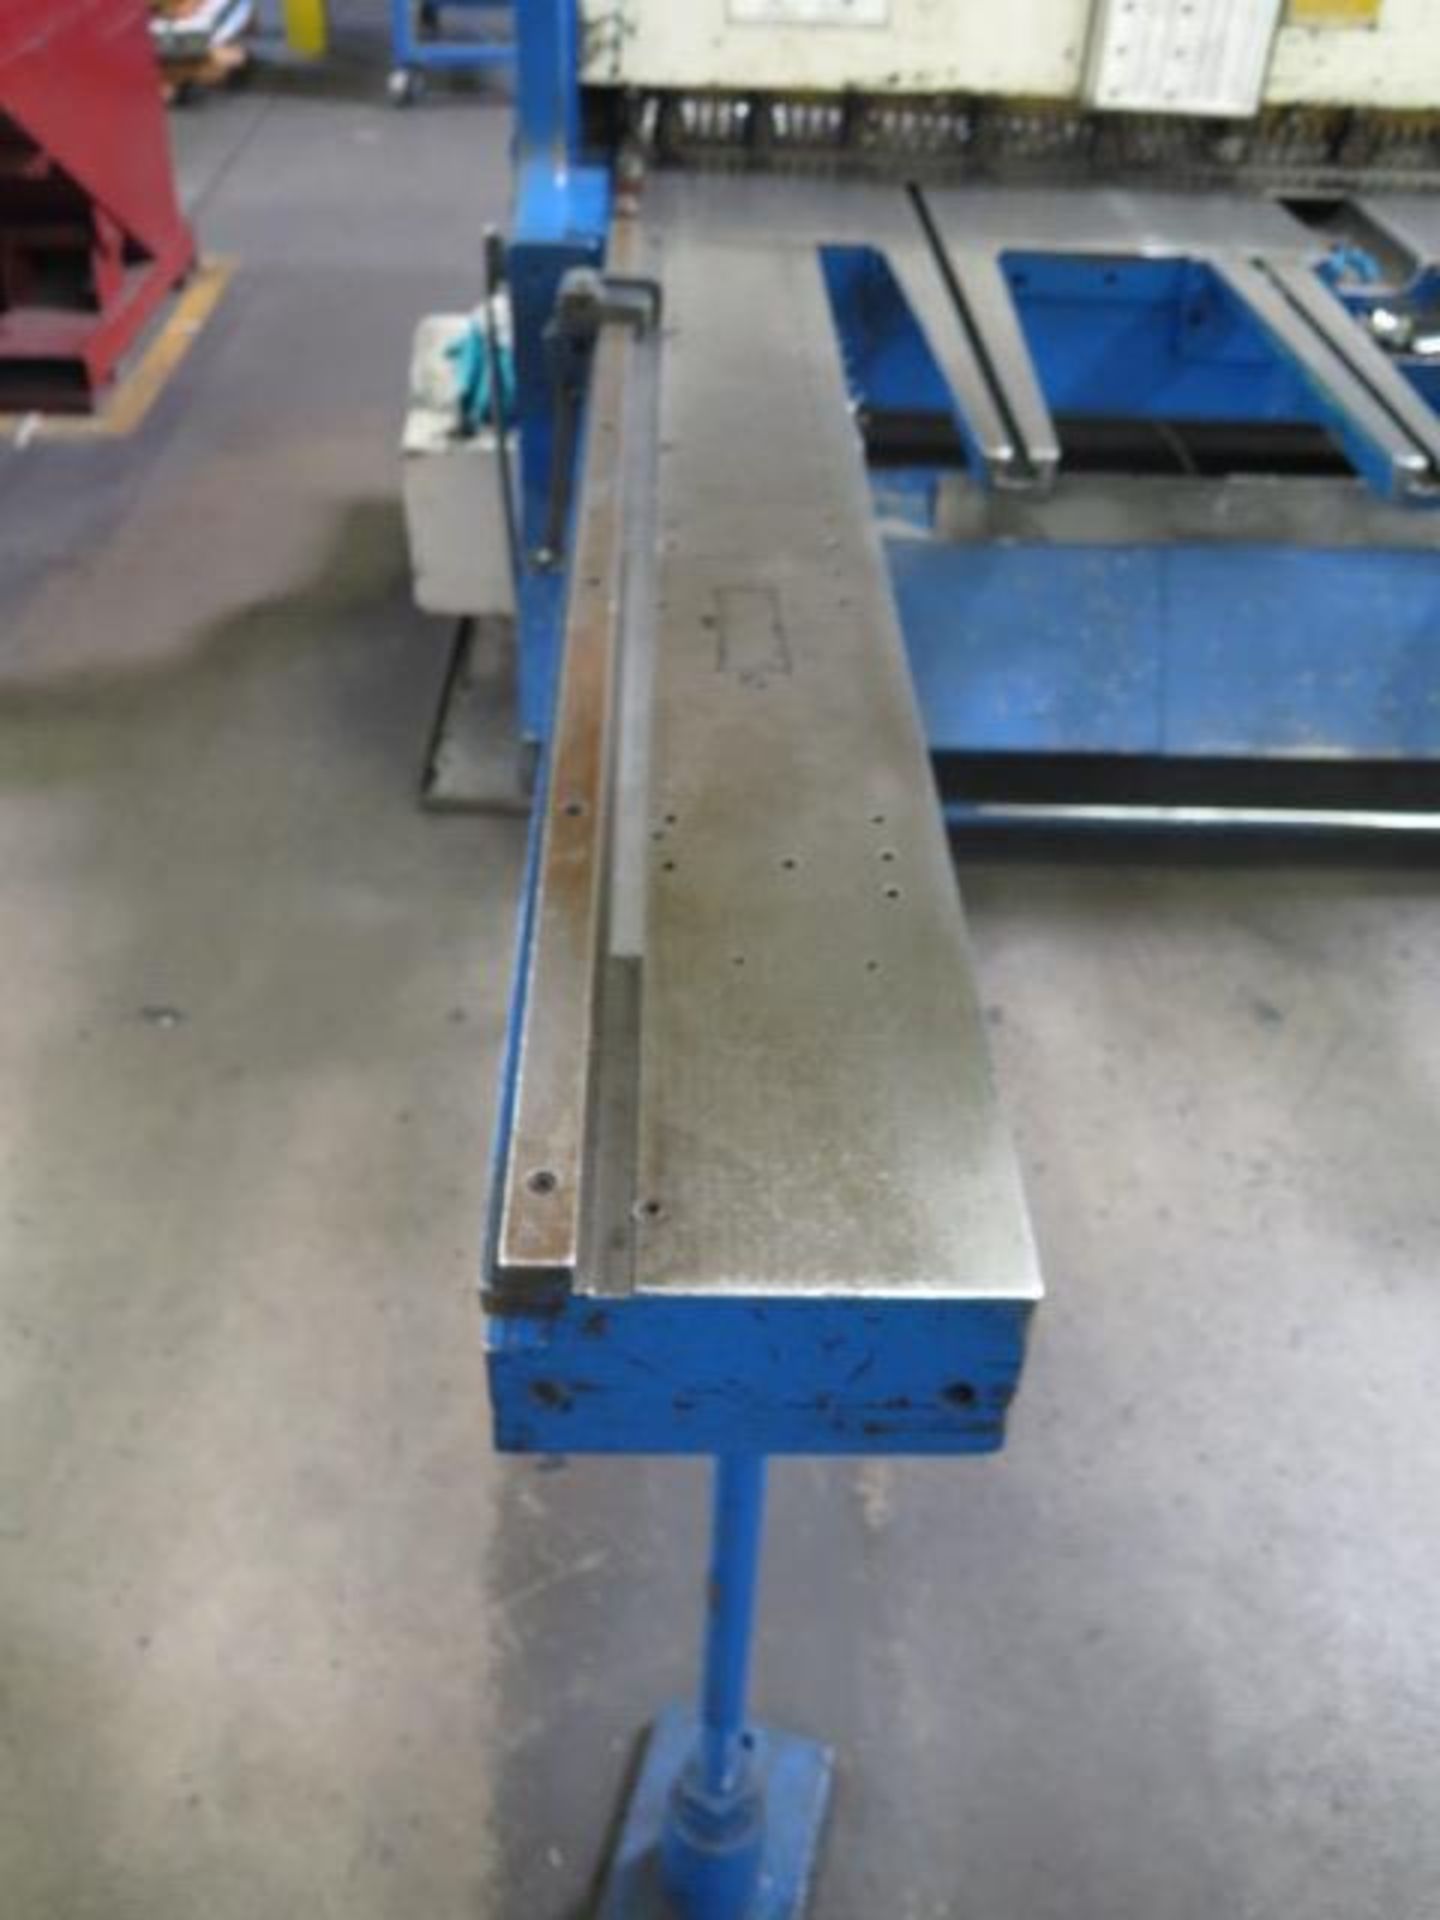 Wysong mdl. 1472 14GA x 72" Power Shear s/nP15-4521 w/80" Sq, Front Supports, NO BACK GA, SOLD AS IS - Image 9 of 11